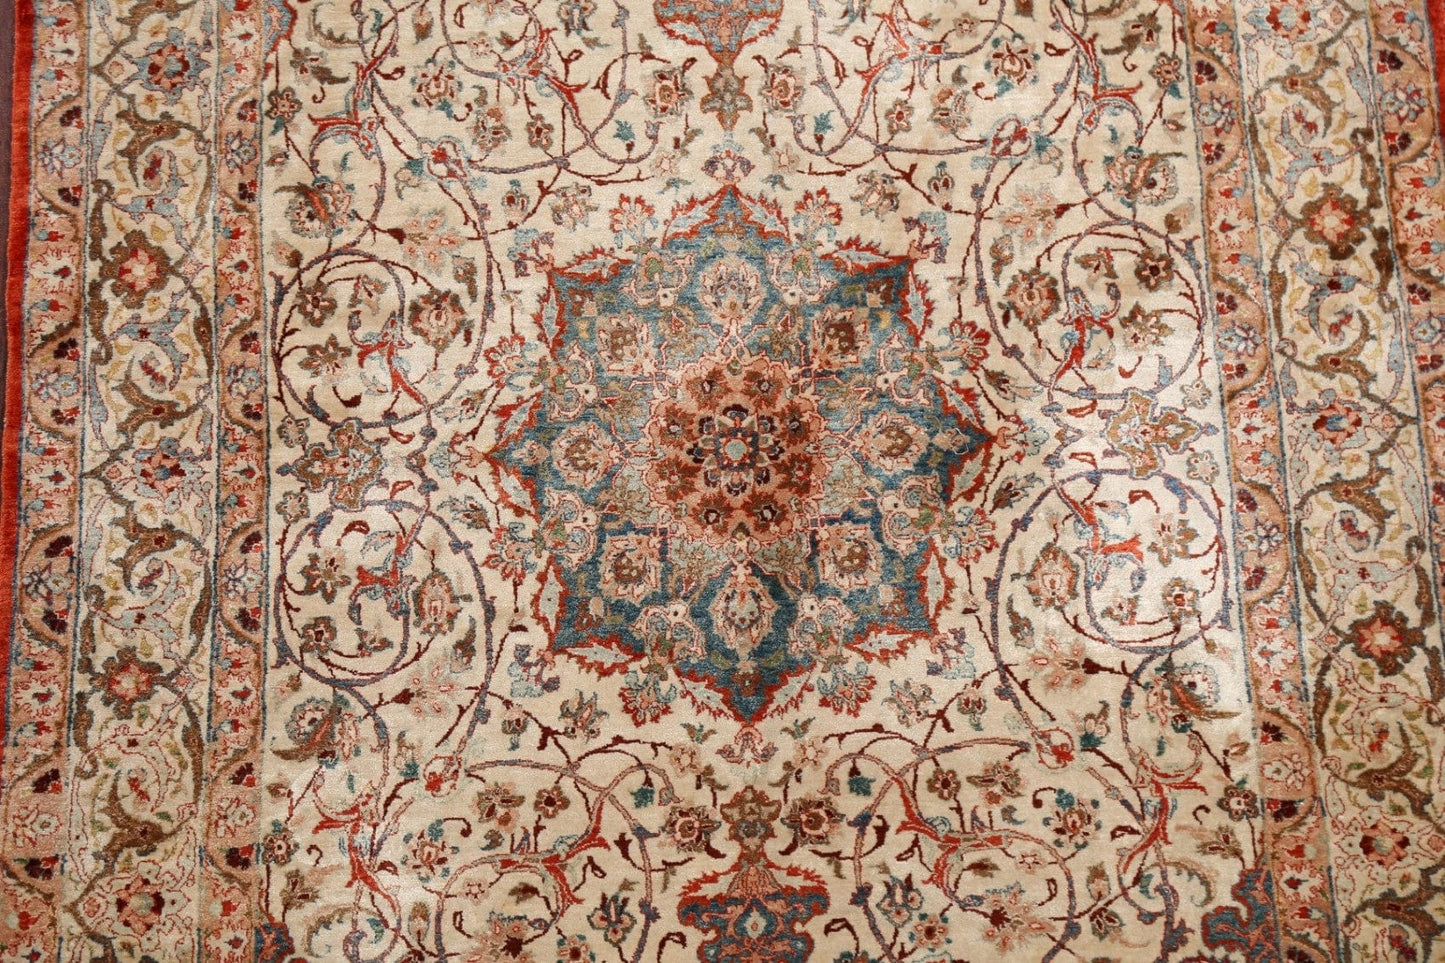 Antique 100% Vegetable Dye Nain Isfahan Persian Area Rug 4x6 SIGNED